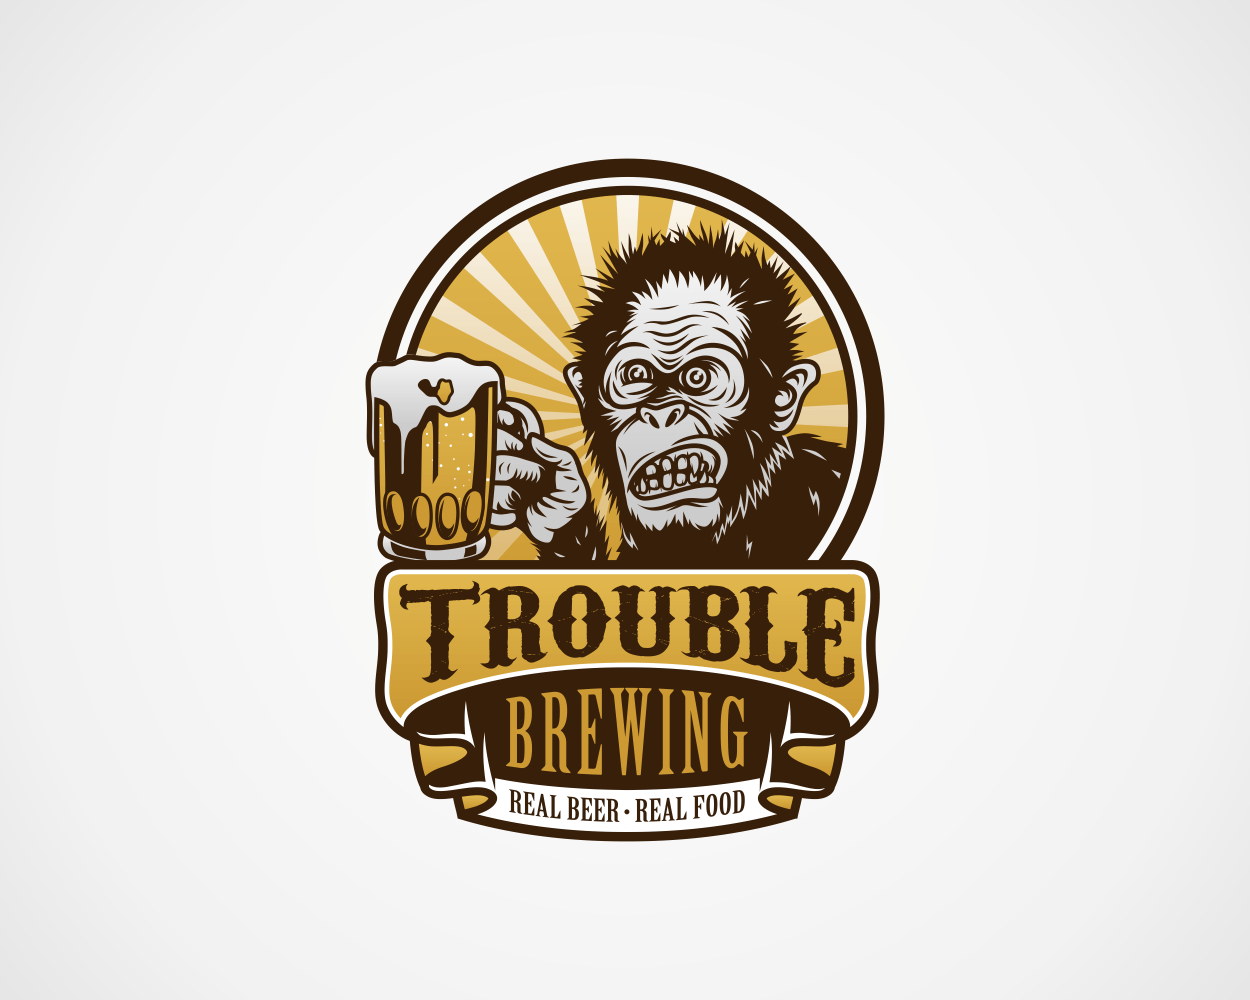 Brewery Logo - Upmarket, Bold, Brewery Logo Design for Trouble Brewing....Real Beer ...